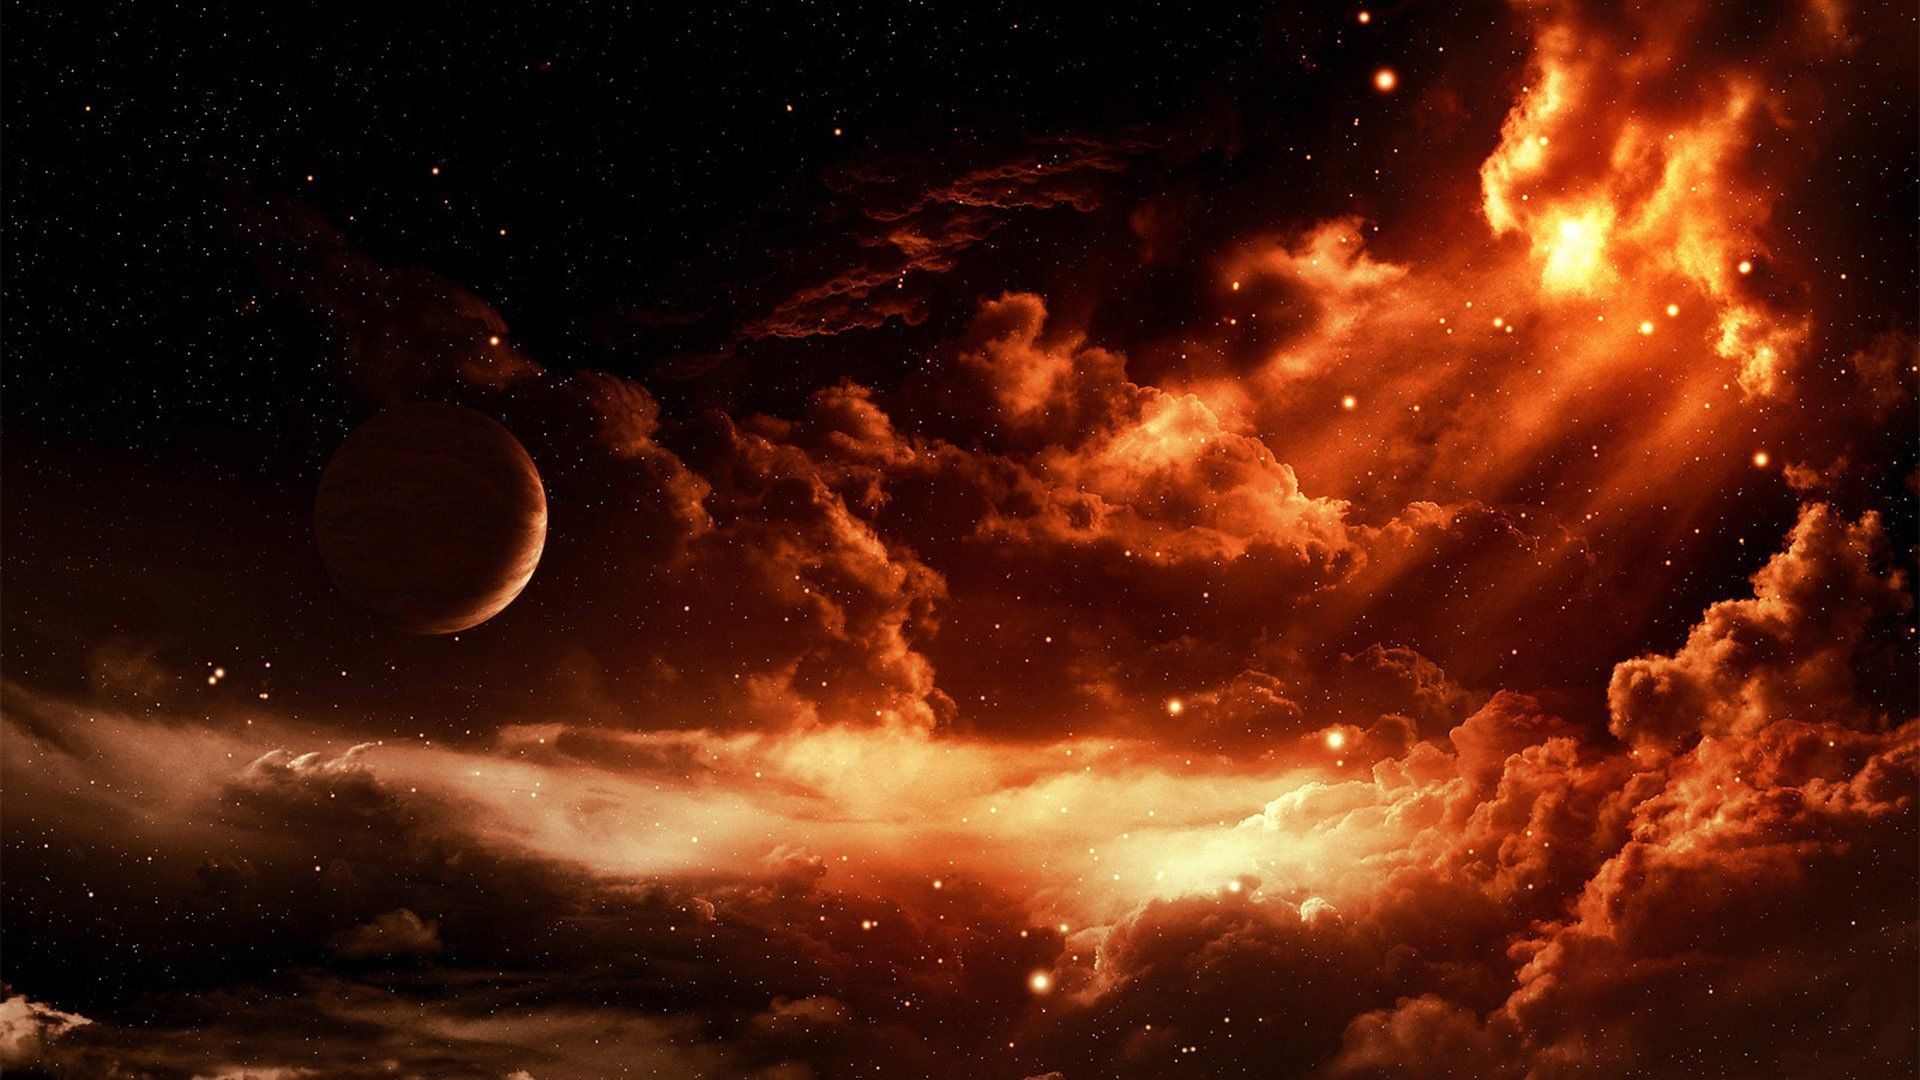 Space Hd Wallpapers 1920x1080 - Pics about space